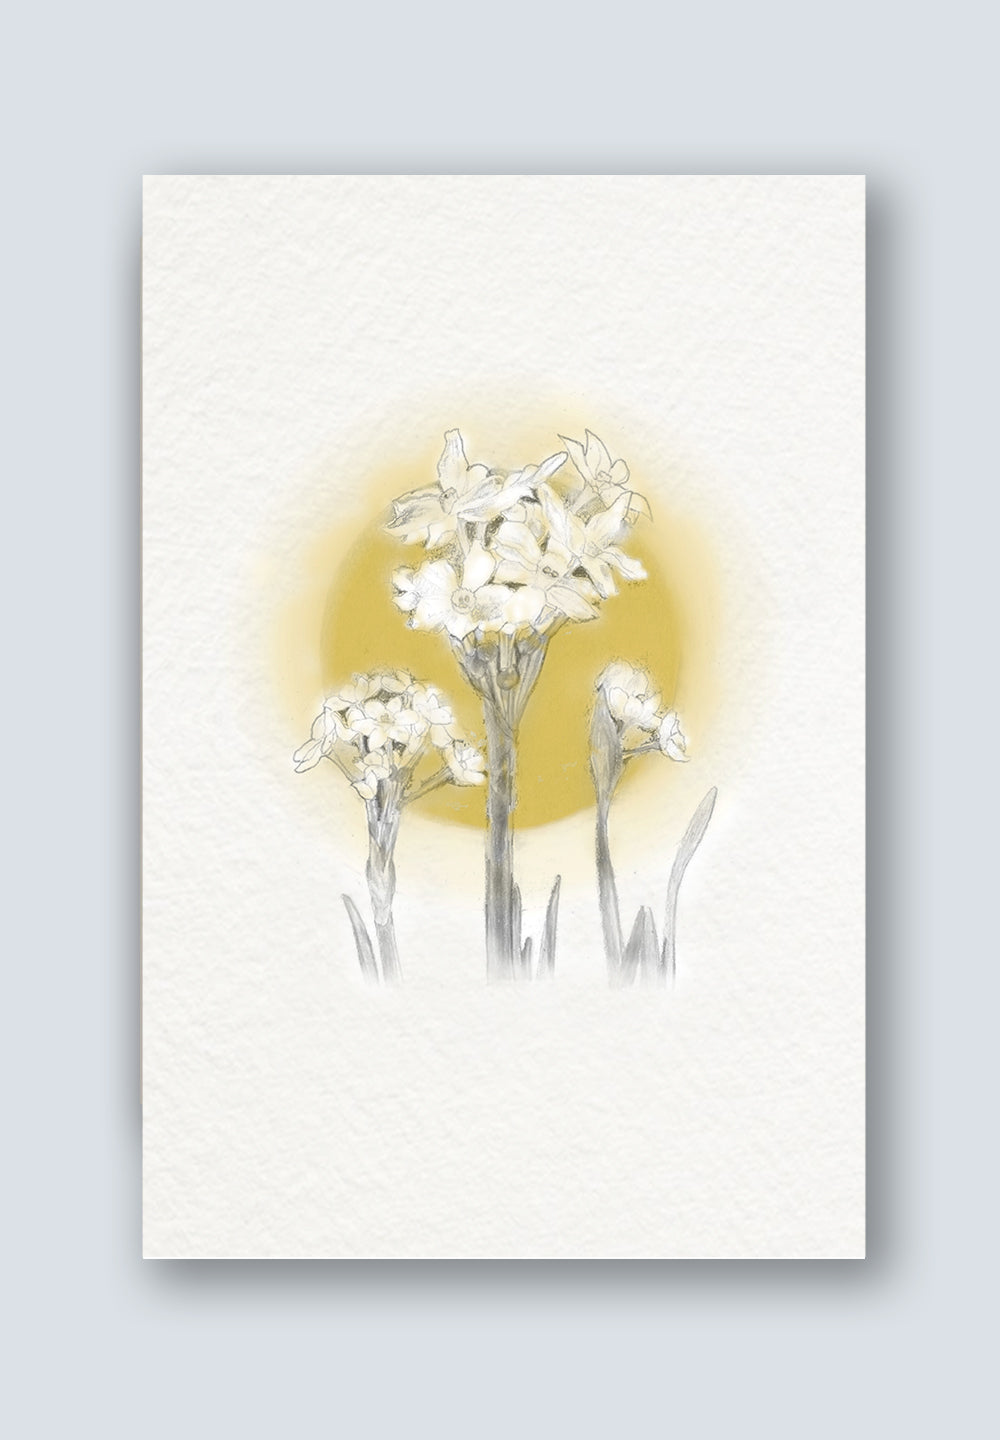 Lily Greeting Cards - Graduation Greeting Card